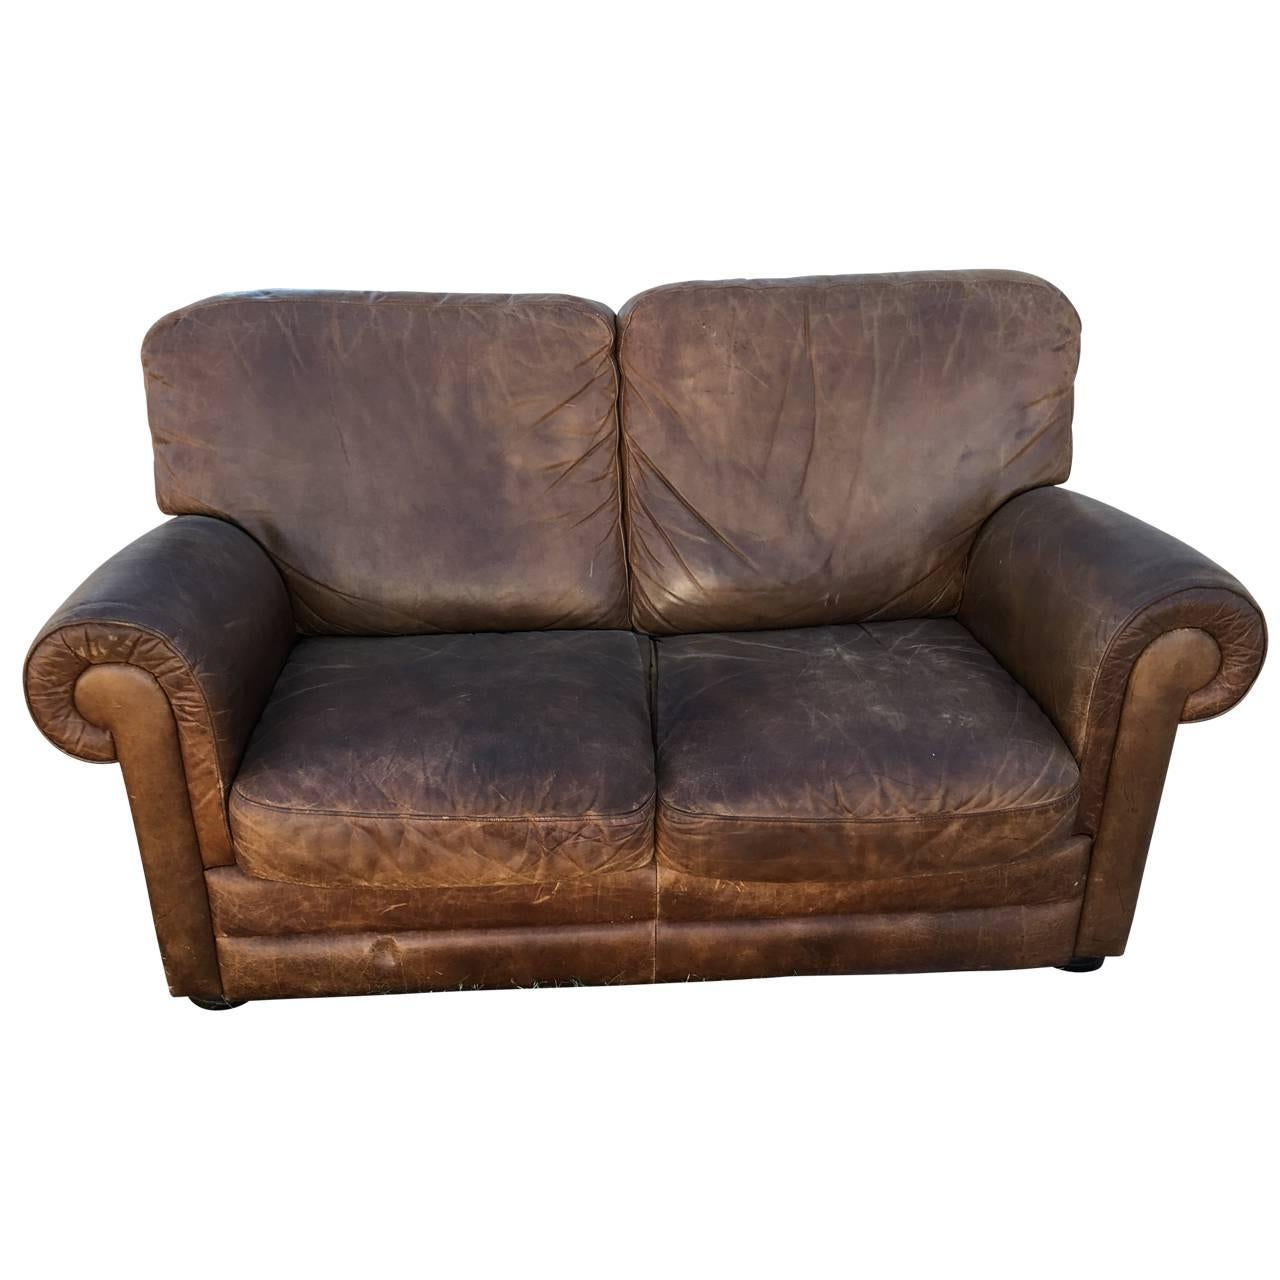 Two seating club sofa in thick cognac leather, on four wood feet.
Mark with made in Italy label underneath.

$190 flat rate front door delivery includes Washington DC metro, Baltimore and Philadelphia